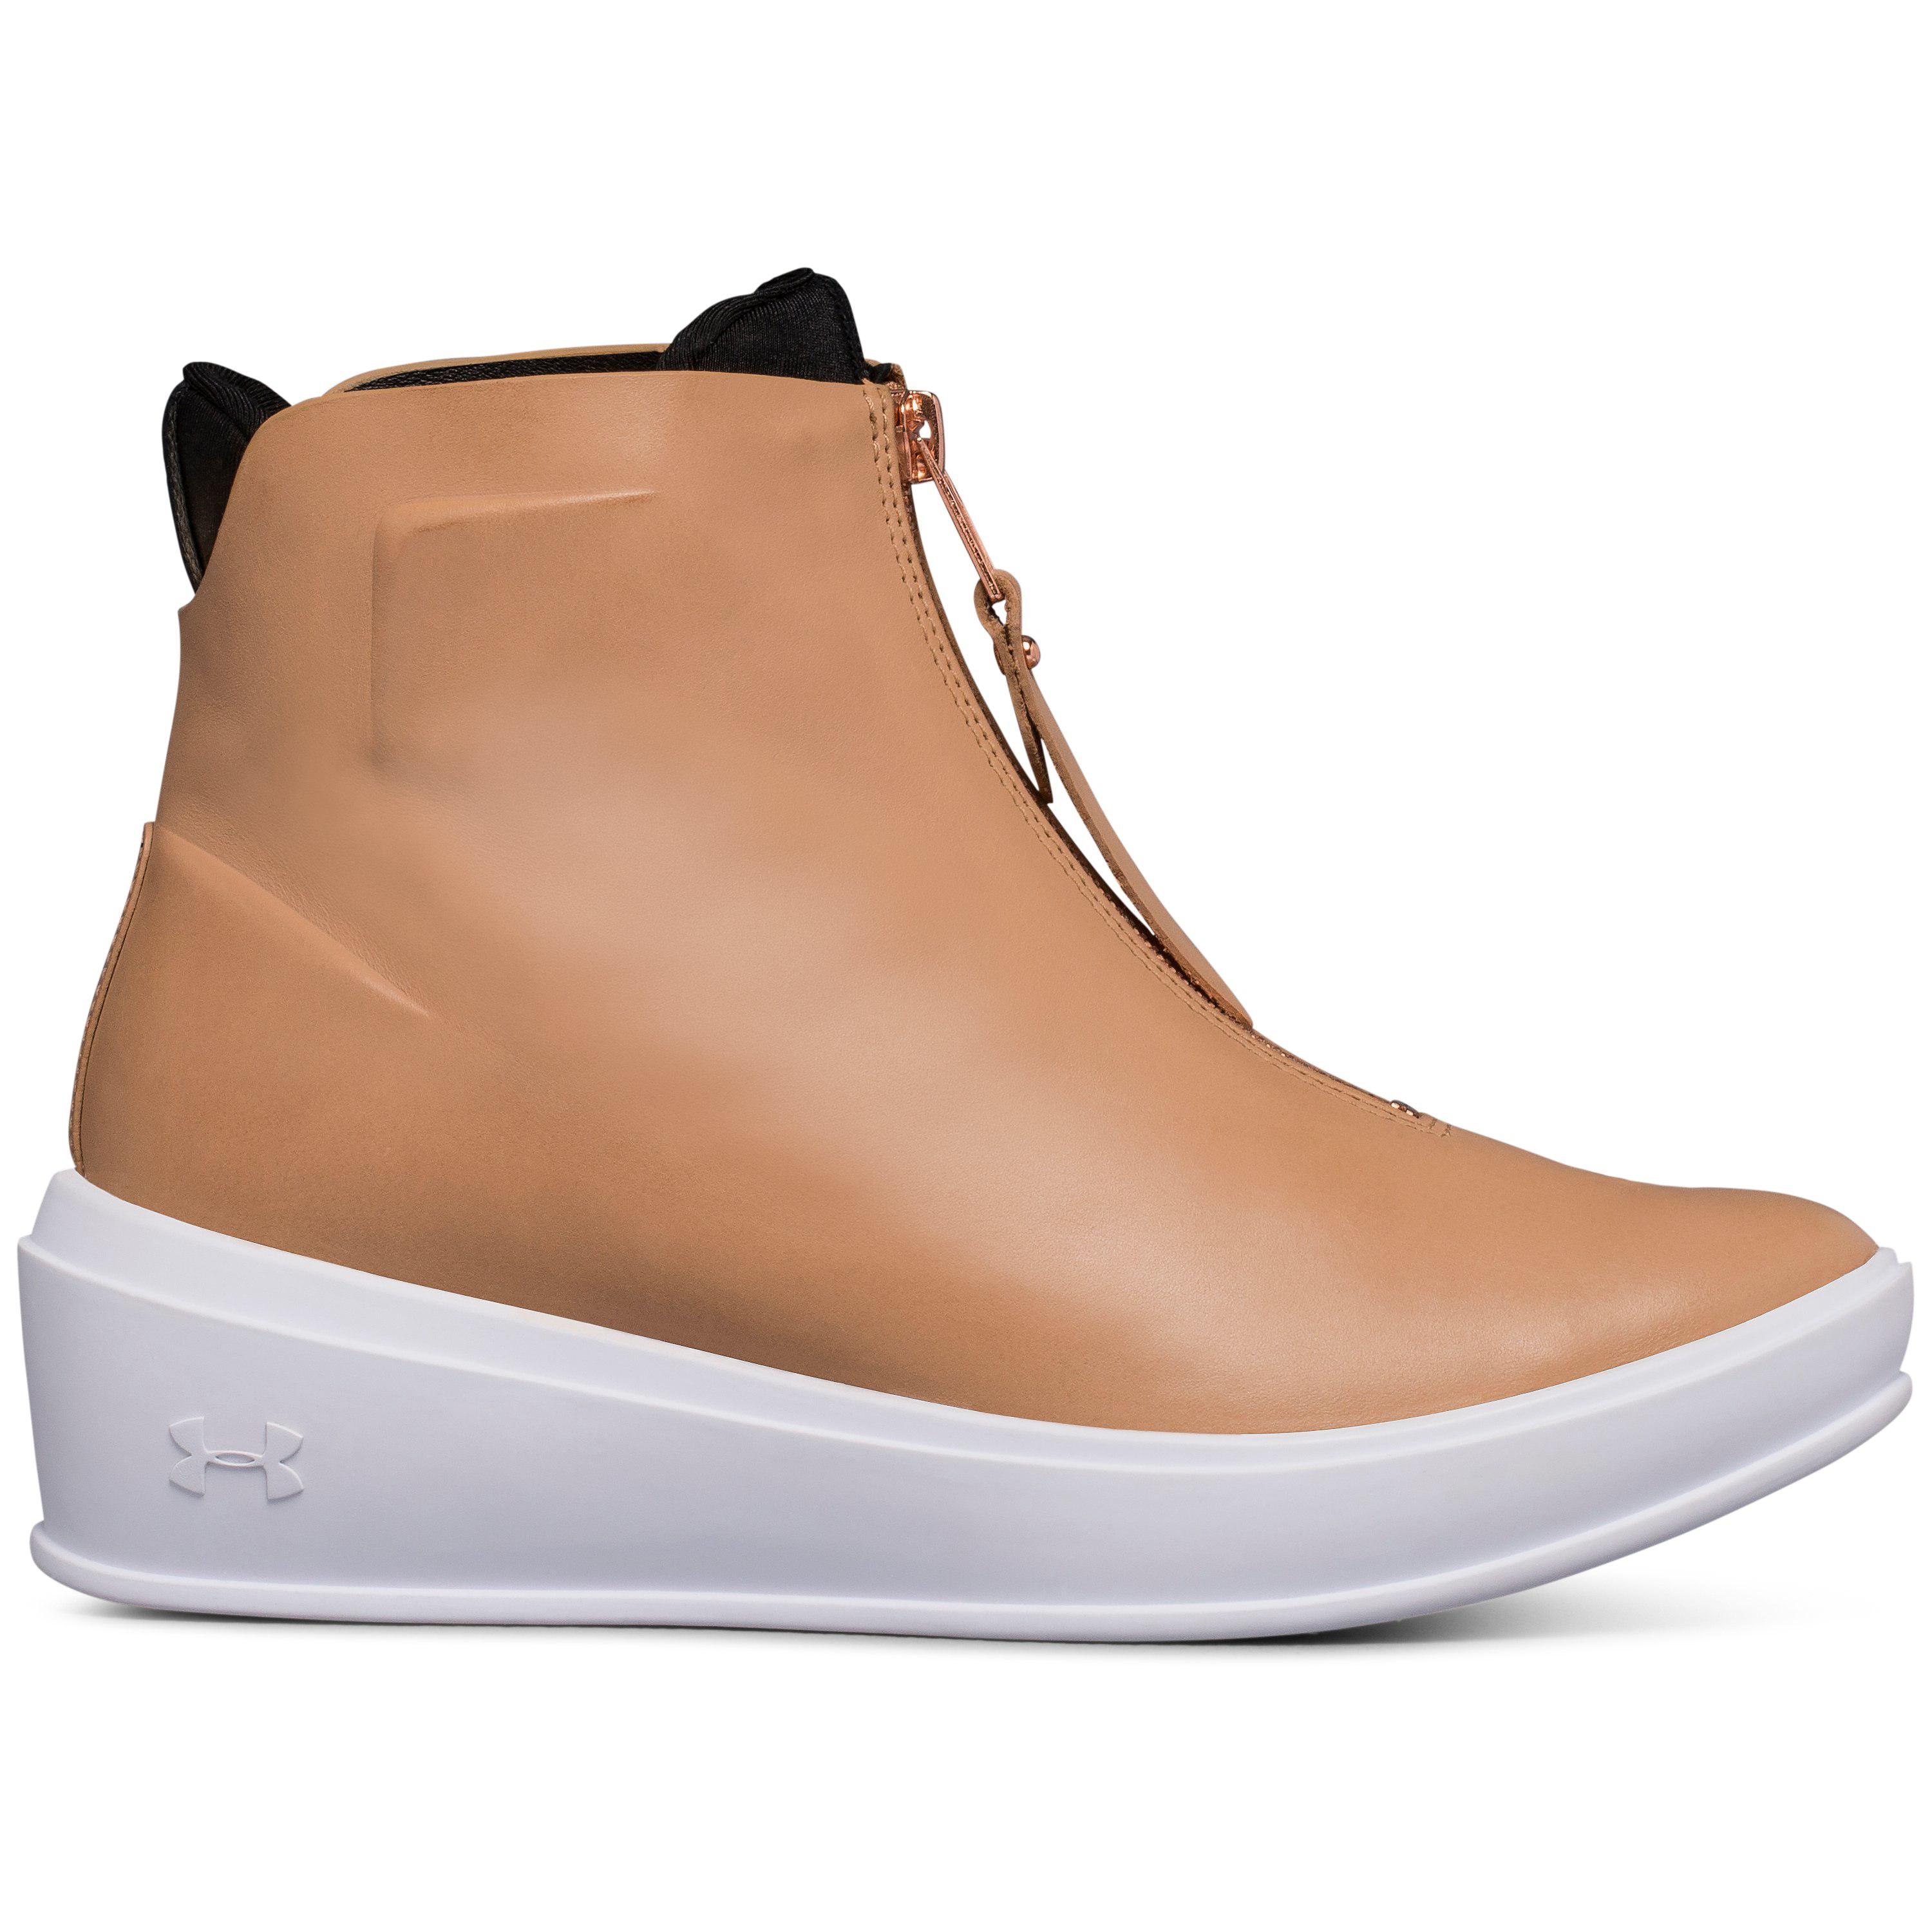 Uas Elevated Wedge Mid Shoes 